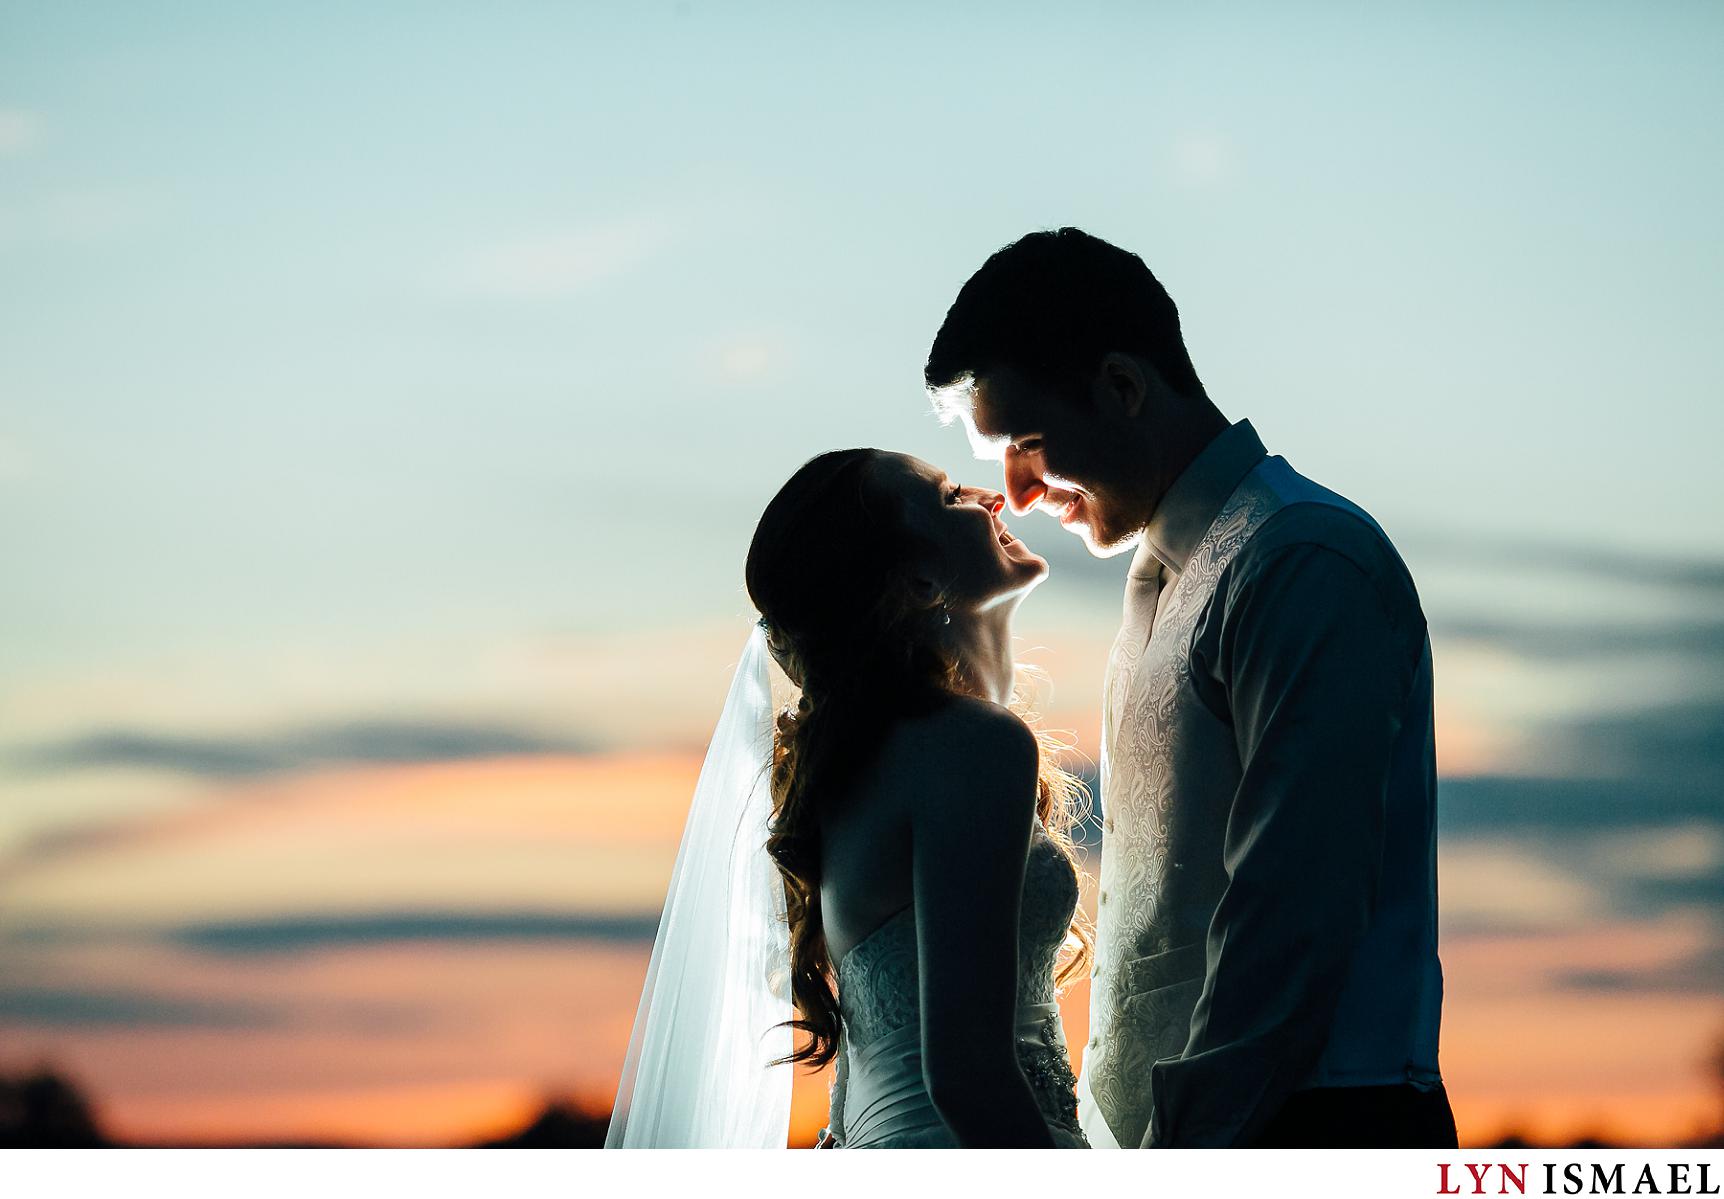 A sunset portrait of the bride and groom